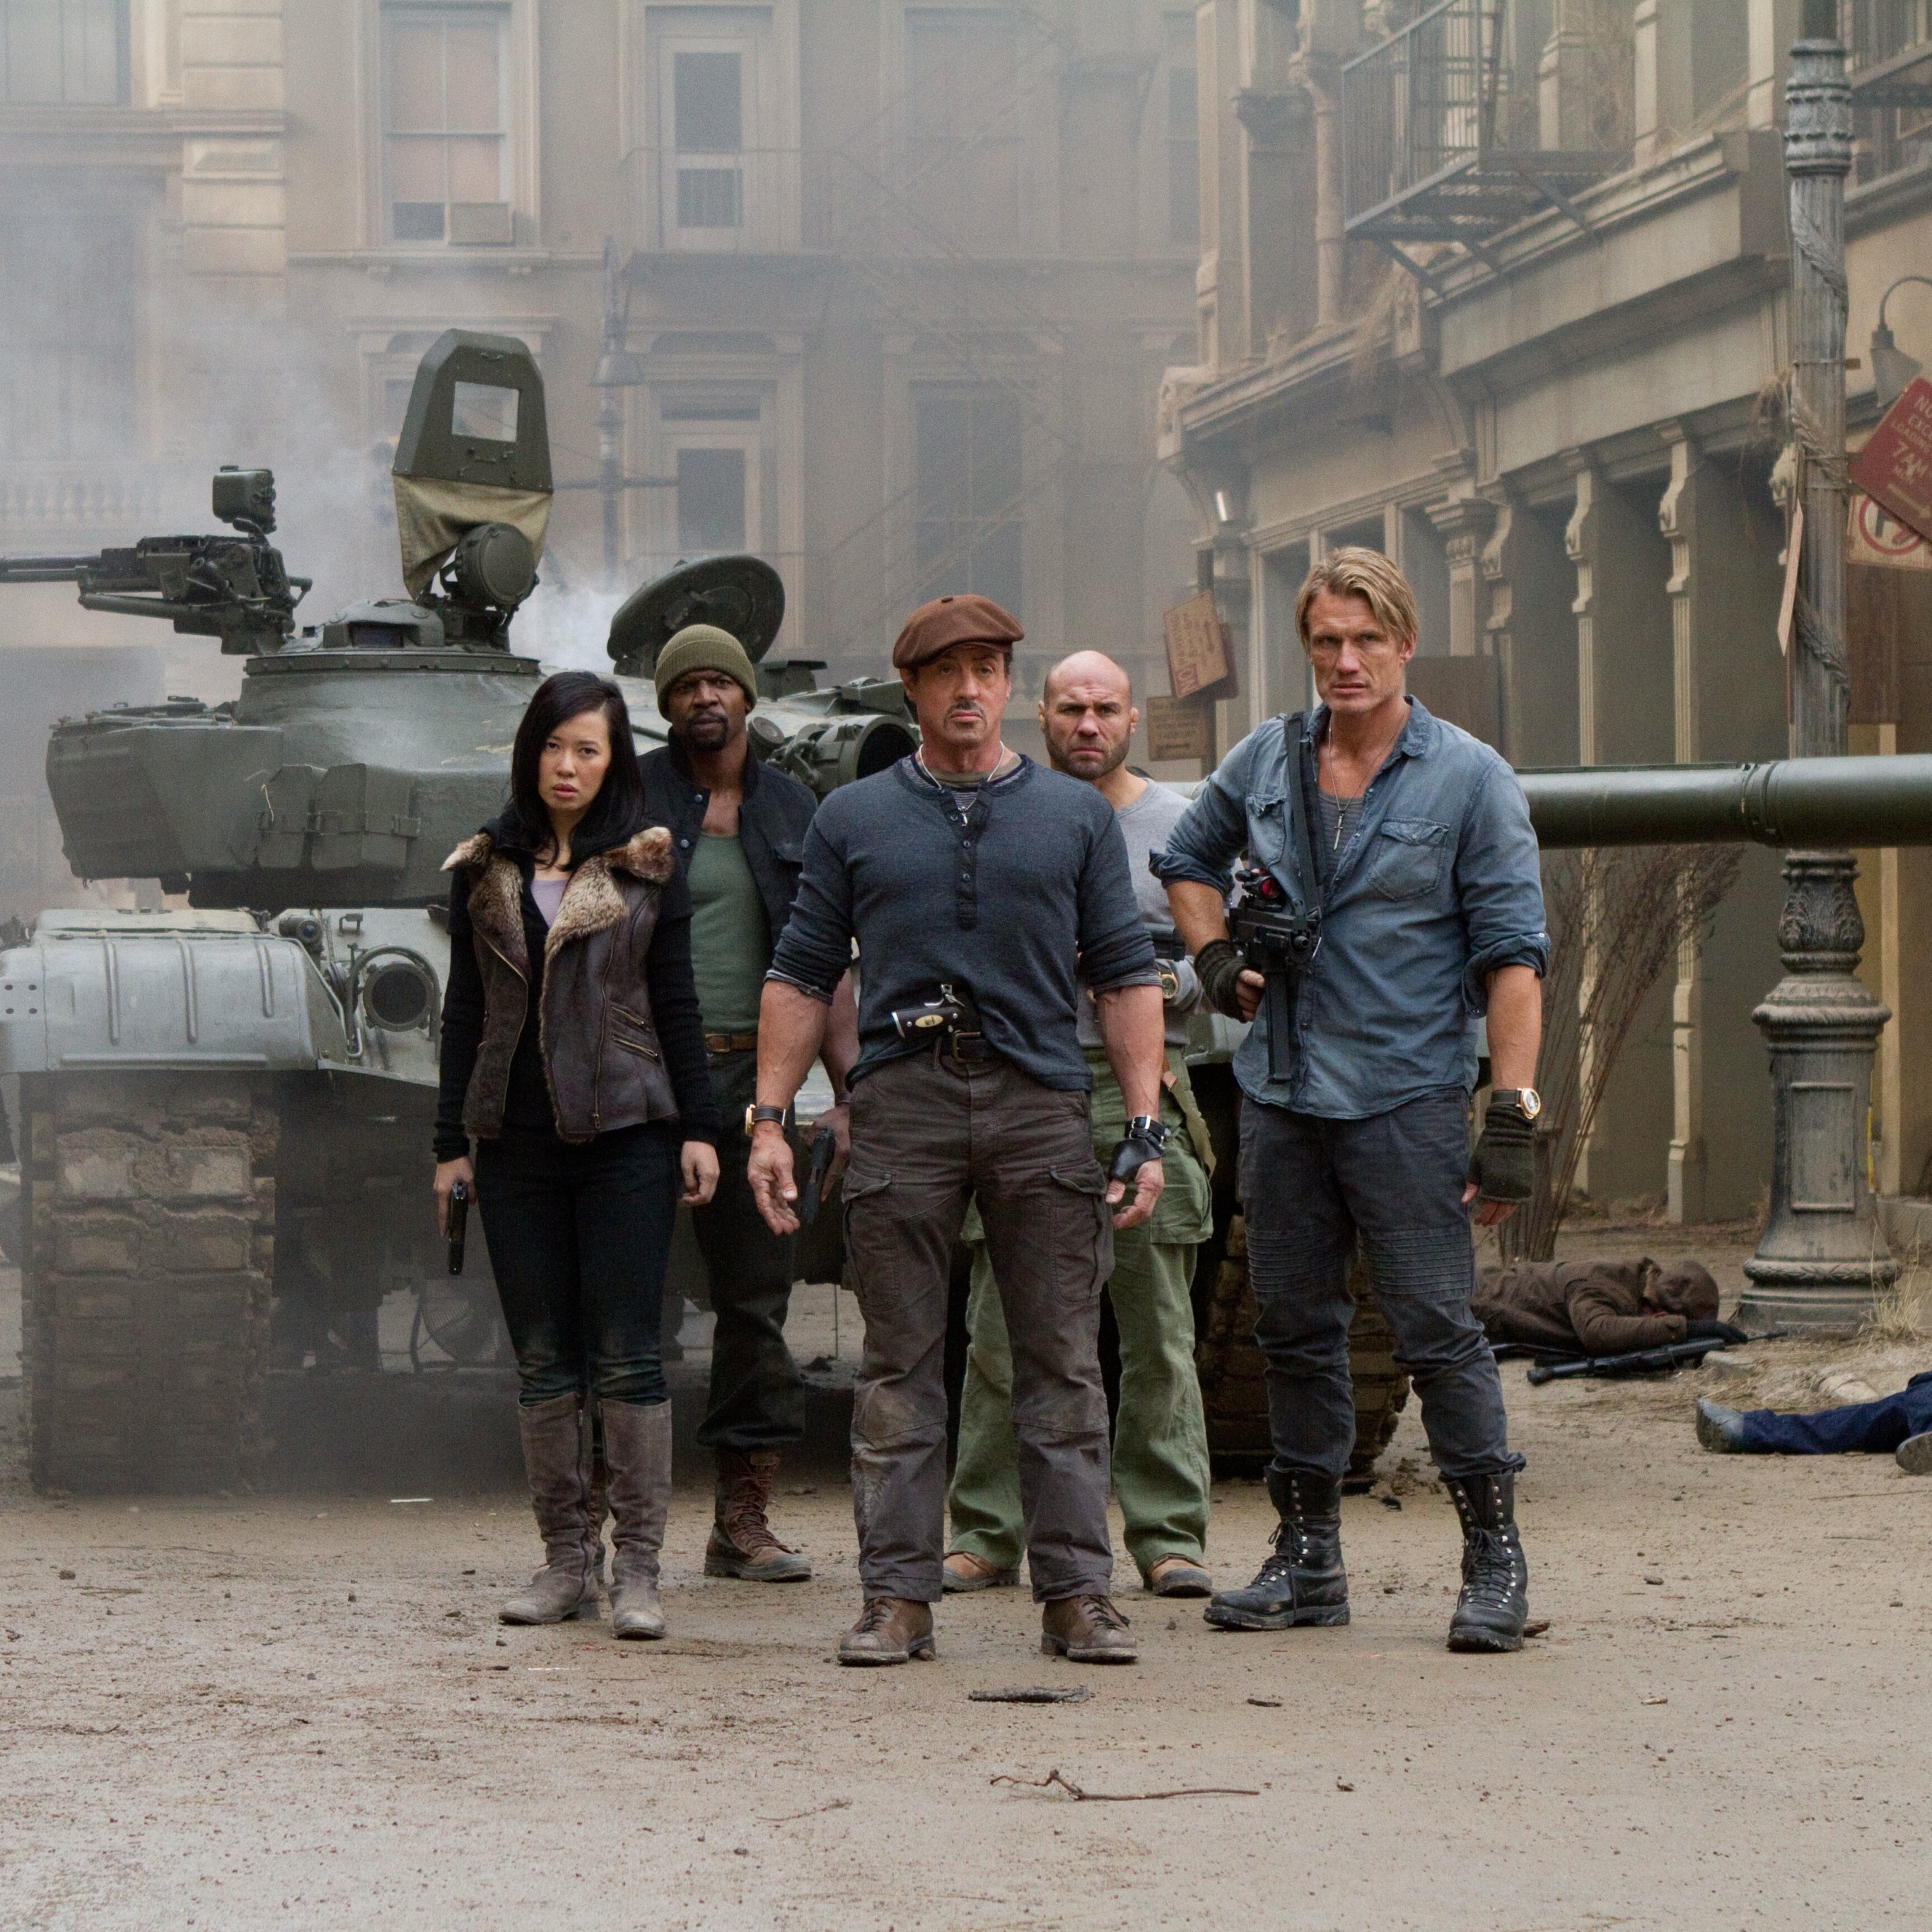 movie, the expendables 2, randy couture, sylvester stallone, dolph lundgren, terry crews, hale caesar, barney ross, gunnar jensen, toll road, nan yu, maggie (the expendables), the expendables